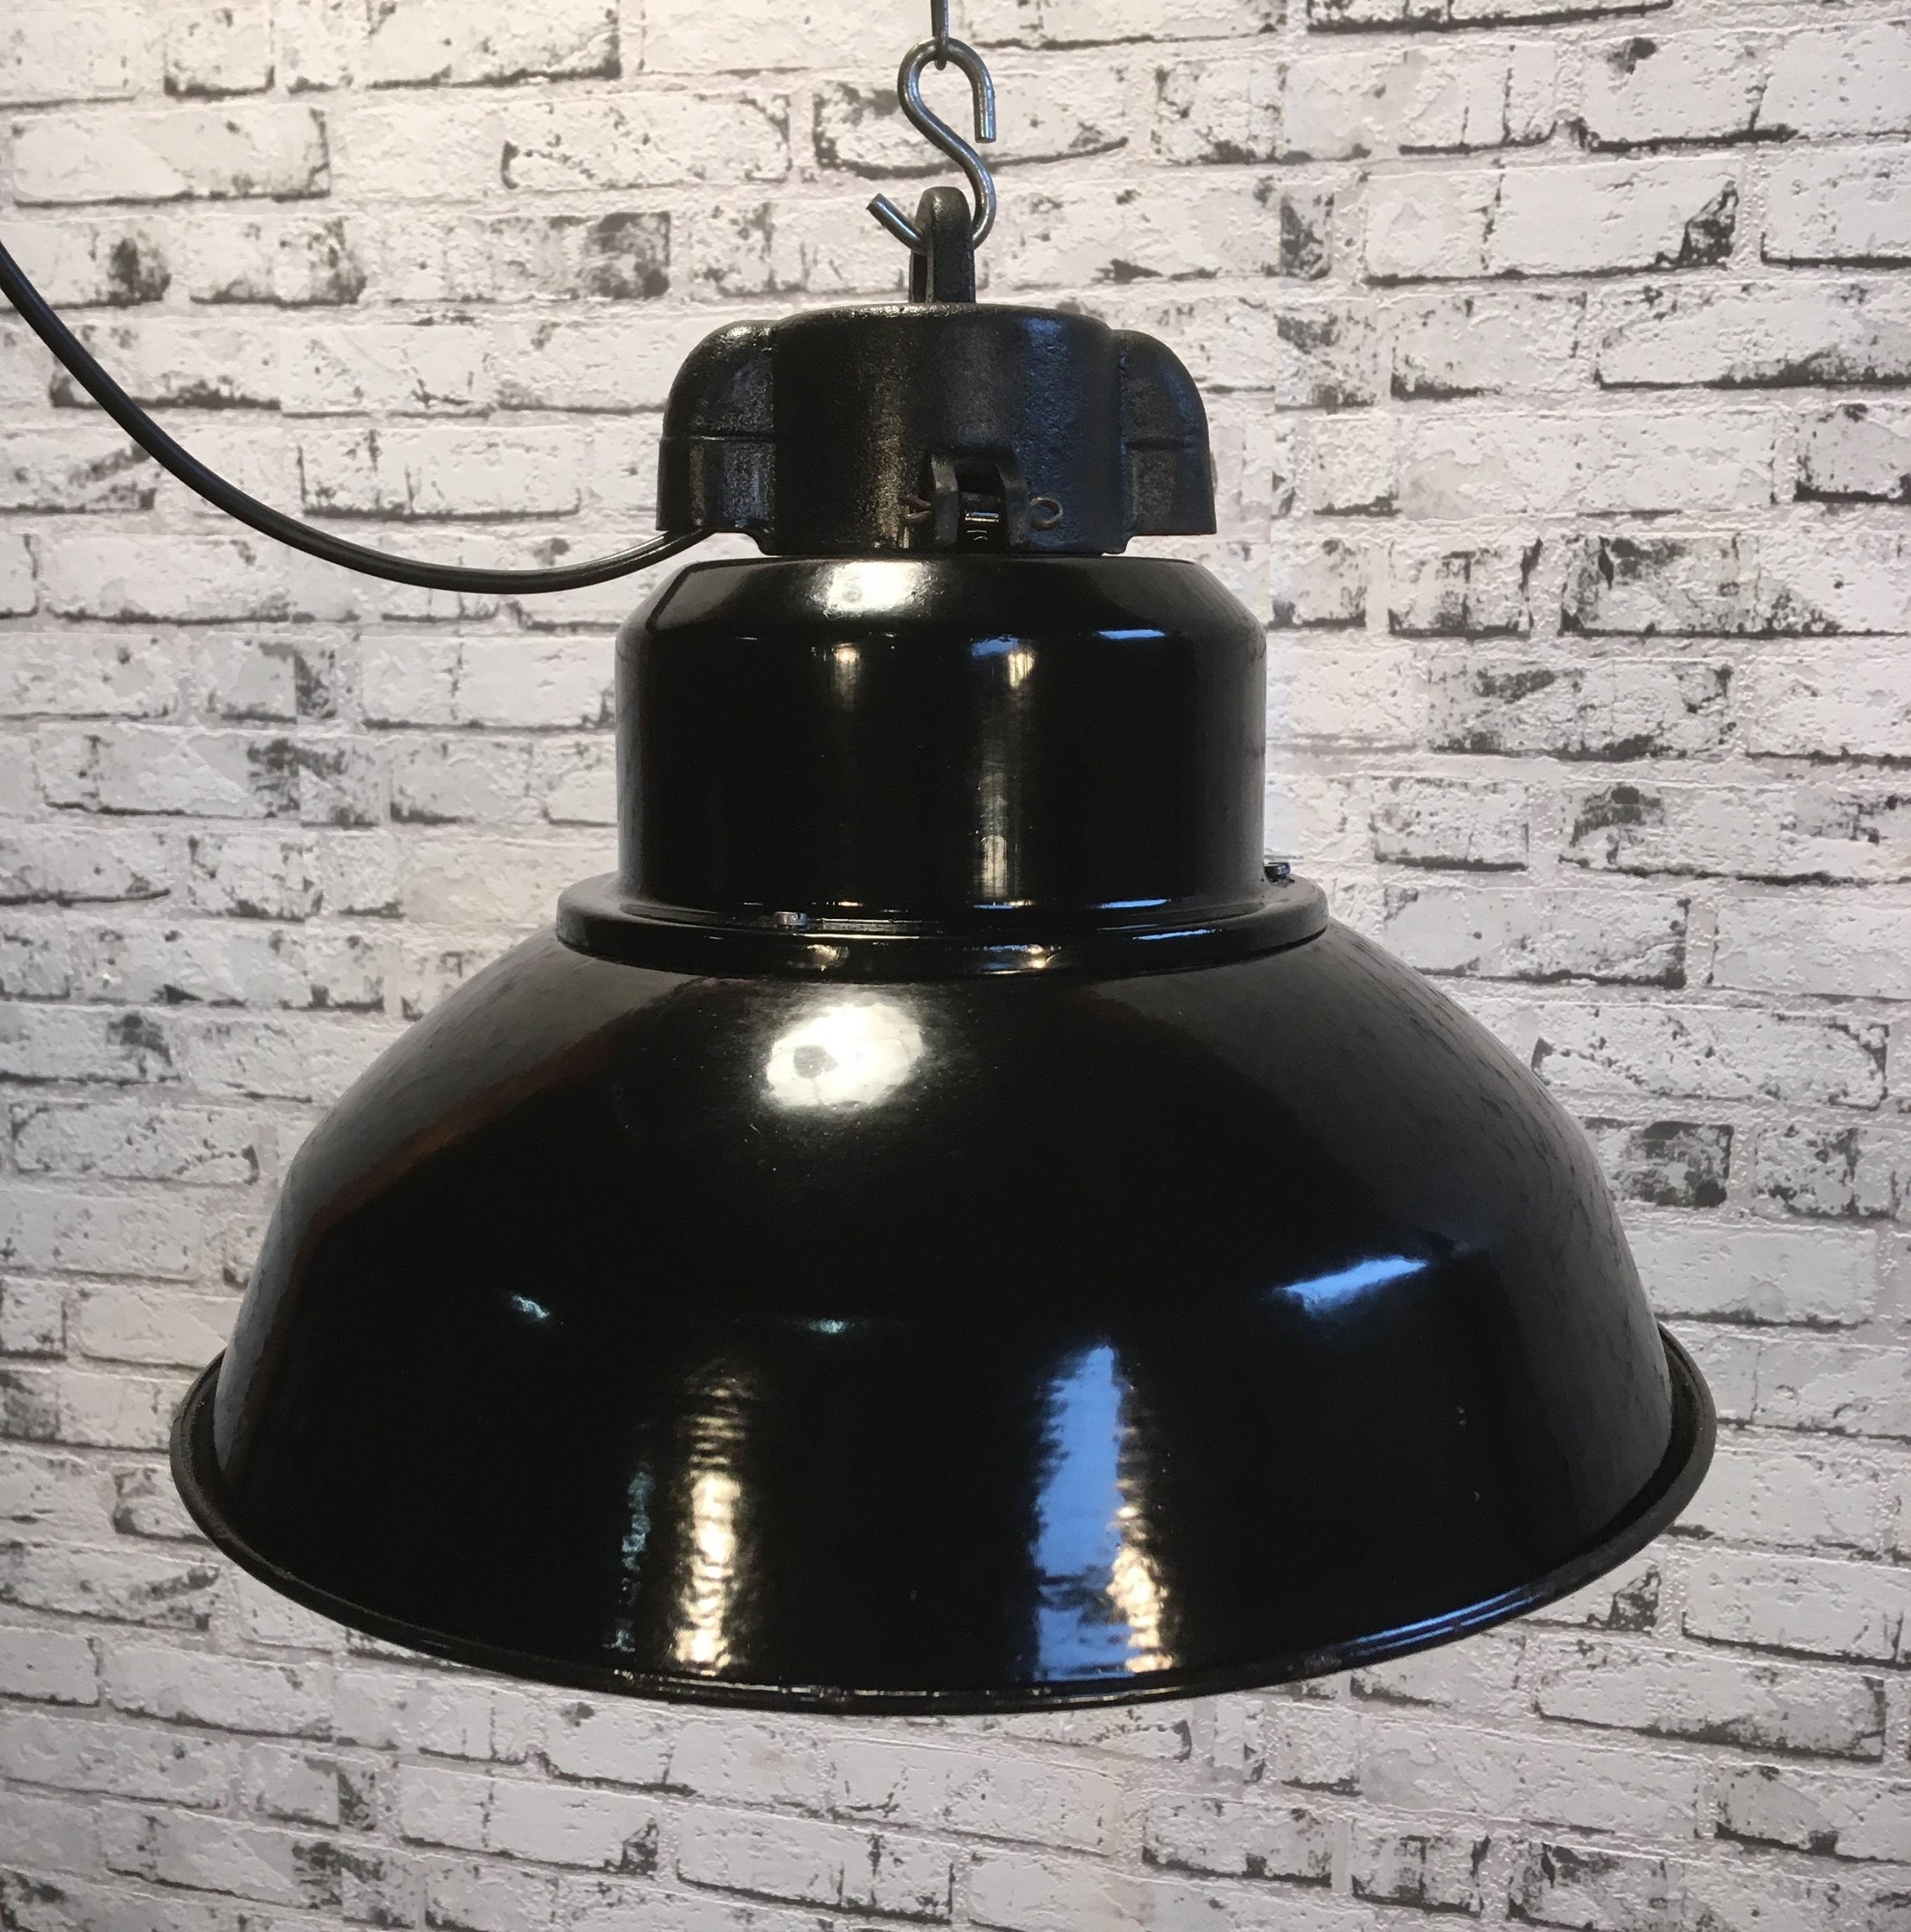 This industrial style pendant lamp was produced in former Czechoslovakia during the 1960s
It features black enamel shade with white interior and cast iron top.
New porcelain socket for E 27 lightbulbs and wire.